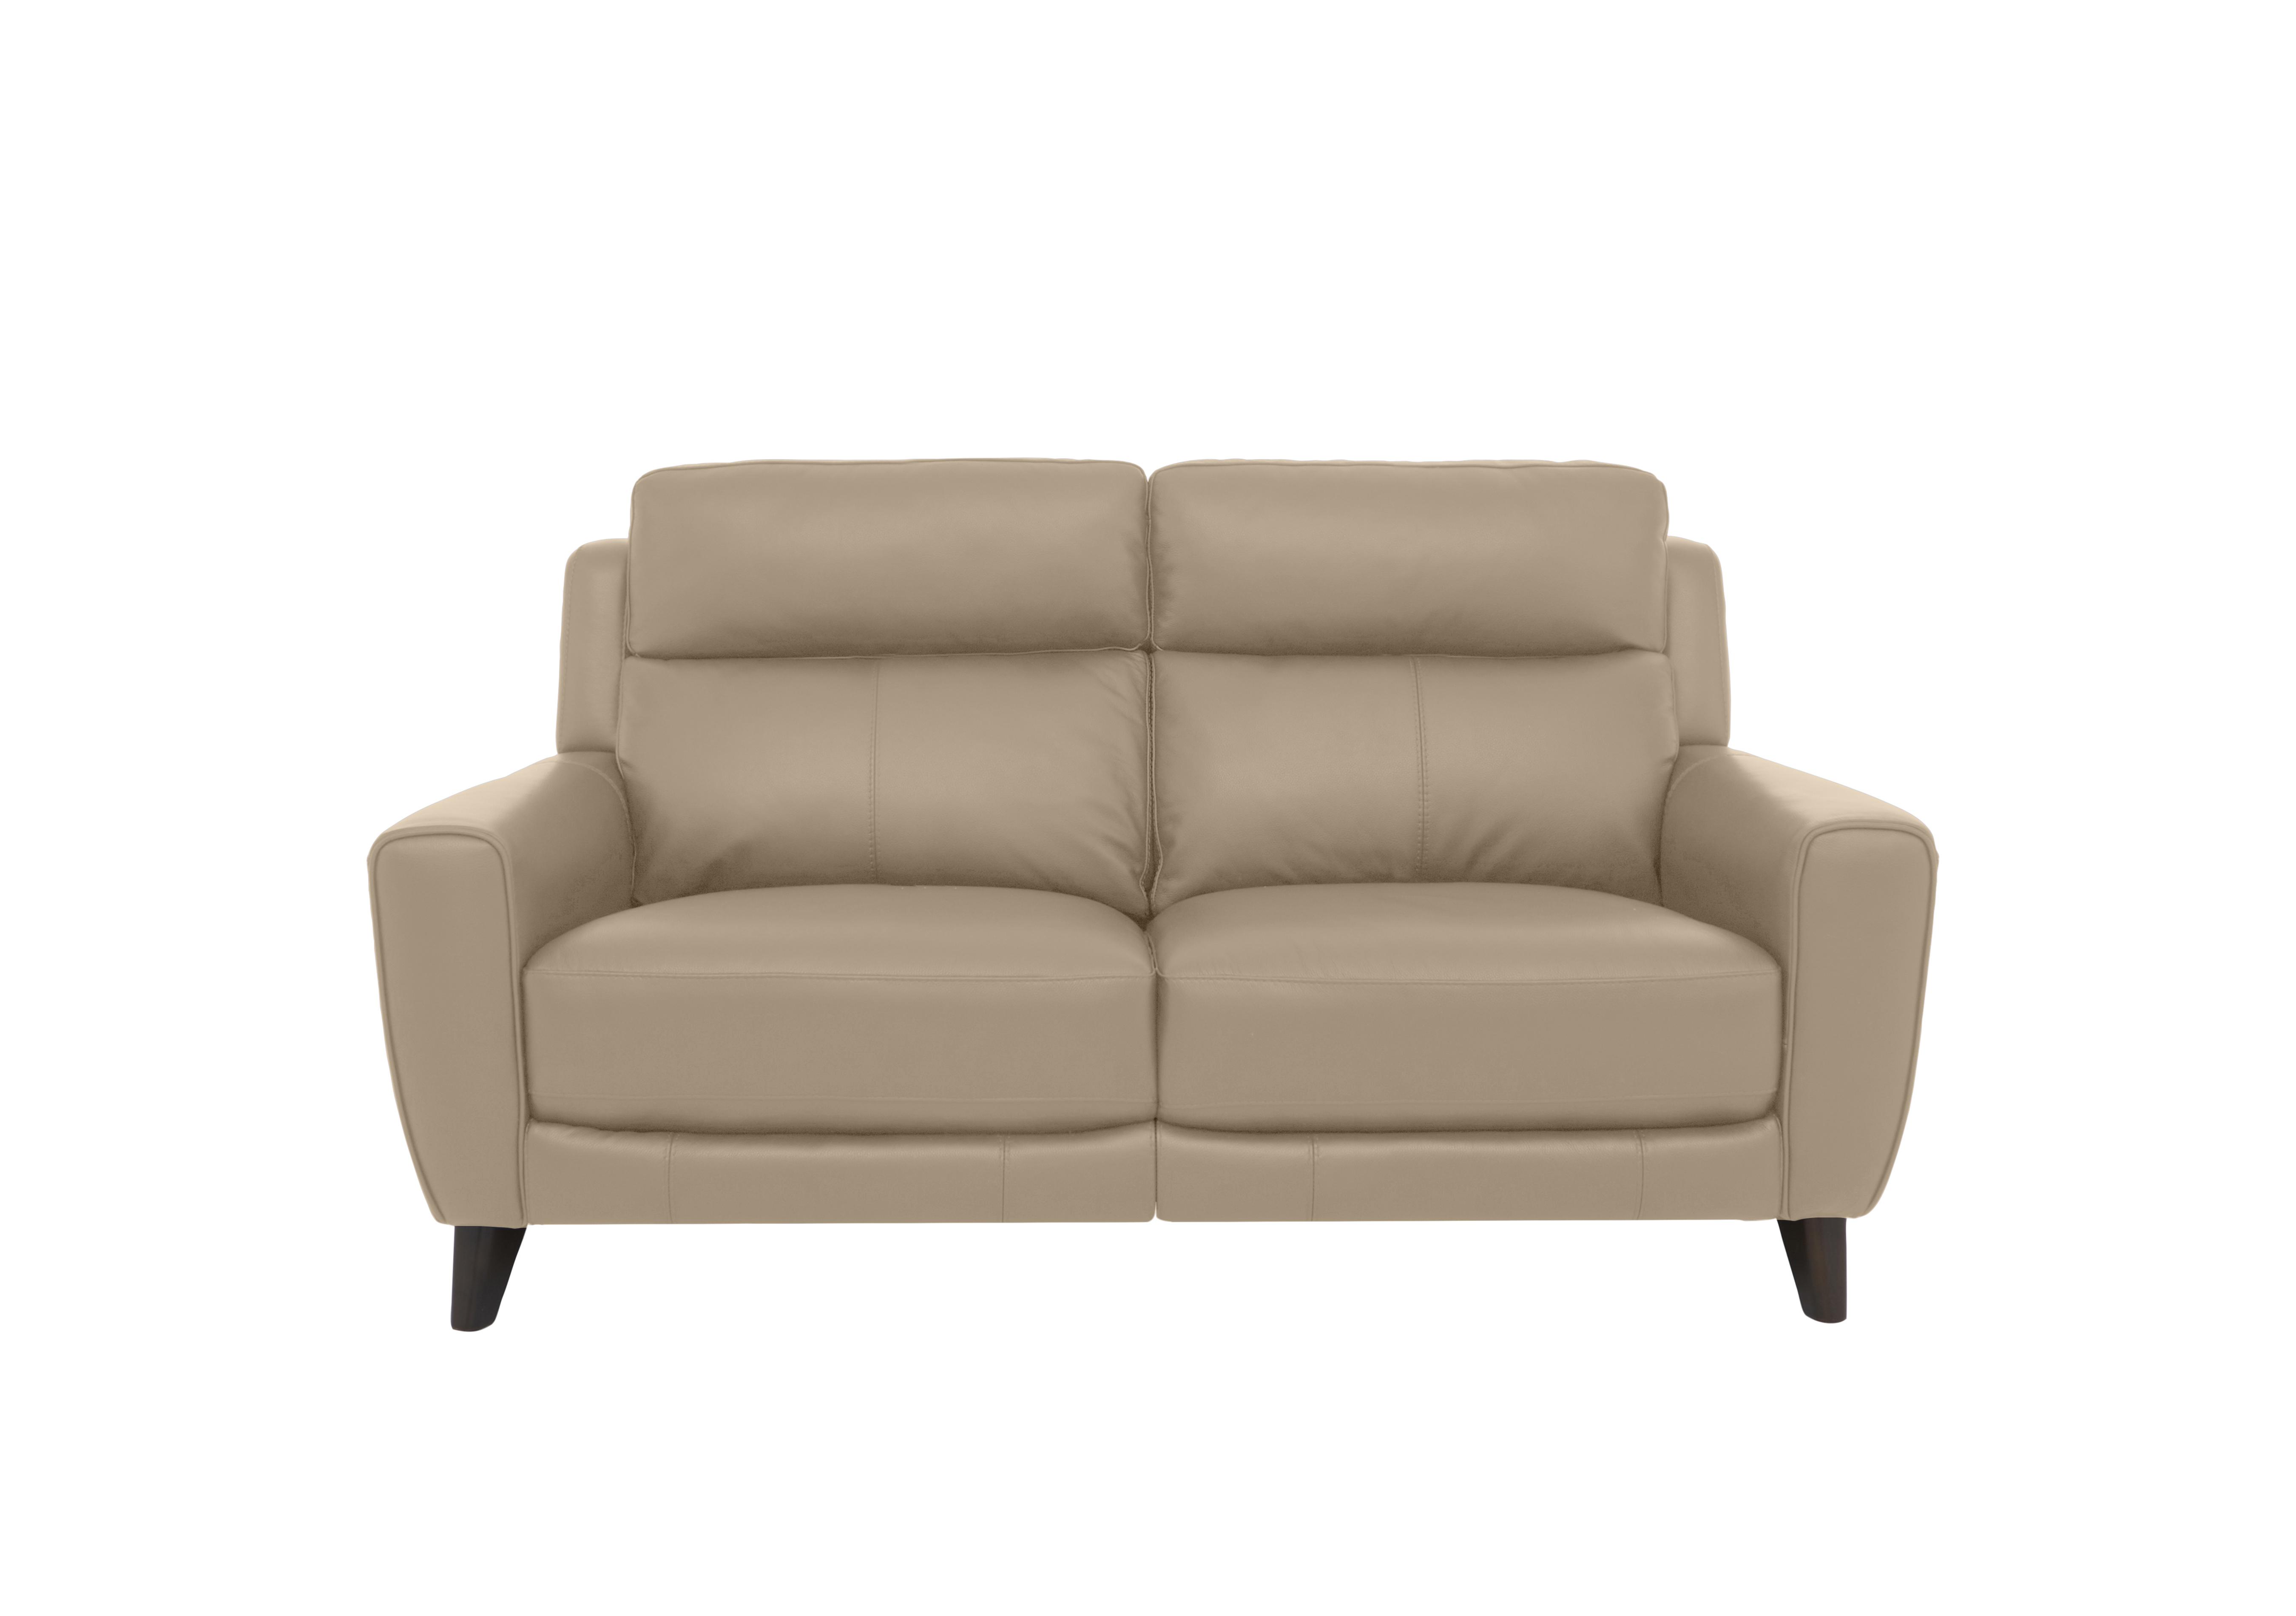 Zen 2 Seater Leather Sofa in Bx-039c Pebble on Furniture Village